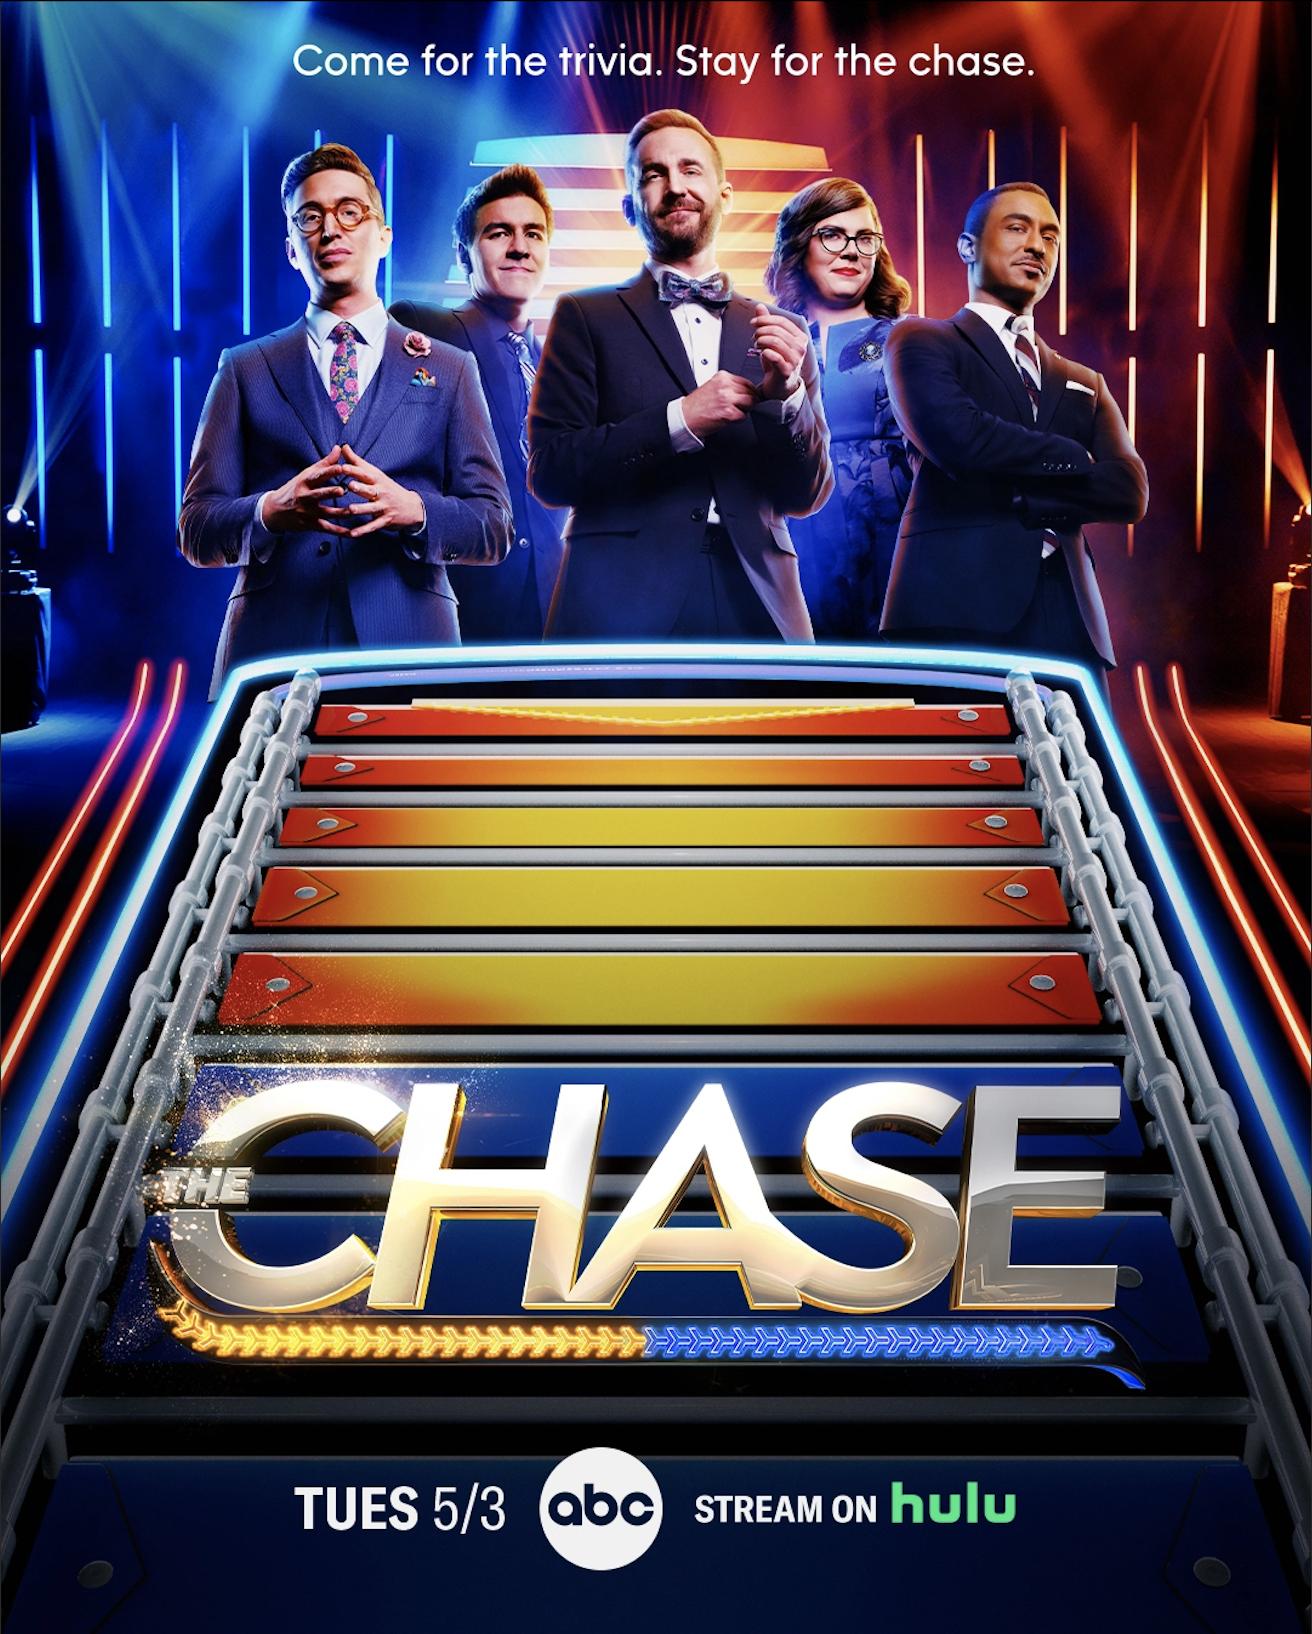 The Chase: Meet The Stunner, The Lightning Bolt & The Queen (9/5) (Rebroadcast: OAD: 5/3/22)